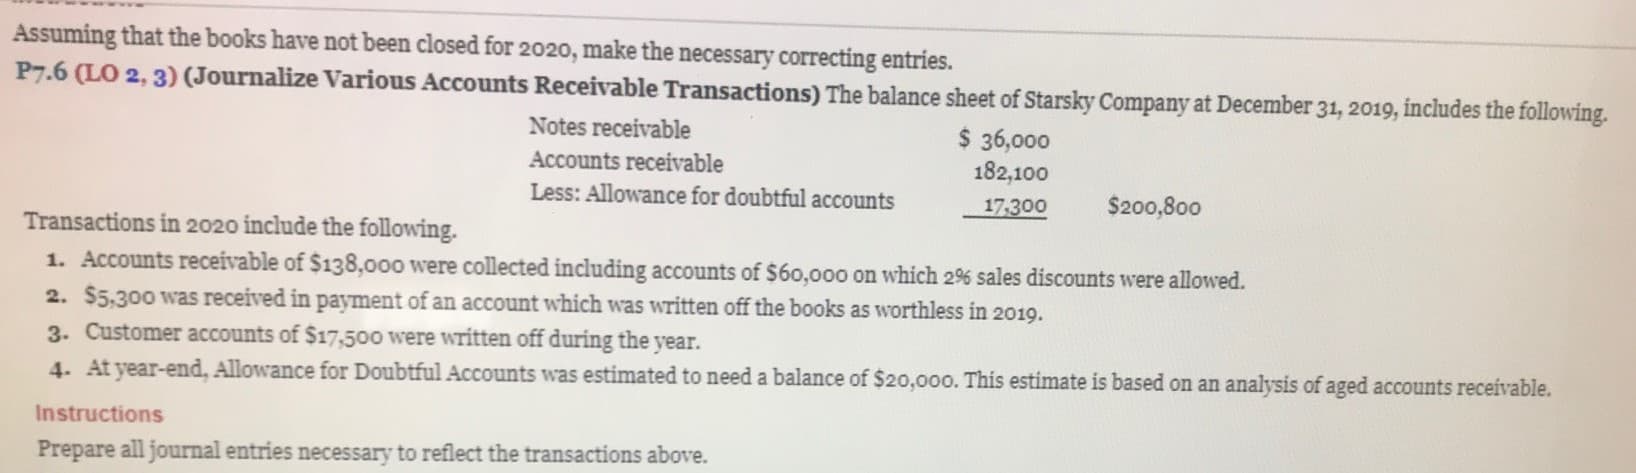 Assuming that the books have not been closed for 2020, make the necessary correcting entries.
P7.6 (LO 2, 3) (Journalize Various Accounts Receivable Transactions) The balance sheet of Starsky Company at December 31, 2019, includes the following.
Notes receivable
$ 36,000
Accounts receivable
Less: Allowance for doubtful accounts
182,100
17.300
$200,800
Transactions in 2020 include the following.
1. Accounts receivable of $138,000 were collected including accounts of $60,000 on which 2% sales discounts were allowed.
2. $5,300 was received in payment of an account which was written off the books as worthless in 2019.
3. Customer accounts of $17,500 were written off during the year.
4. At year-end, Allowance for Doubtful Accounts was estimated to need a balance of $20,0oo. This estimate is based on an analysis of aged accounts receivable.
Instructions
Prepare all journal entries necessary to reflect the transactions above.
